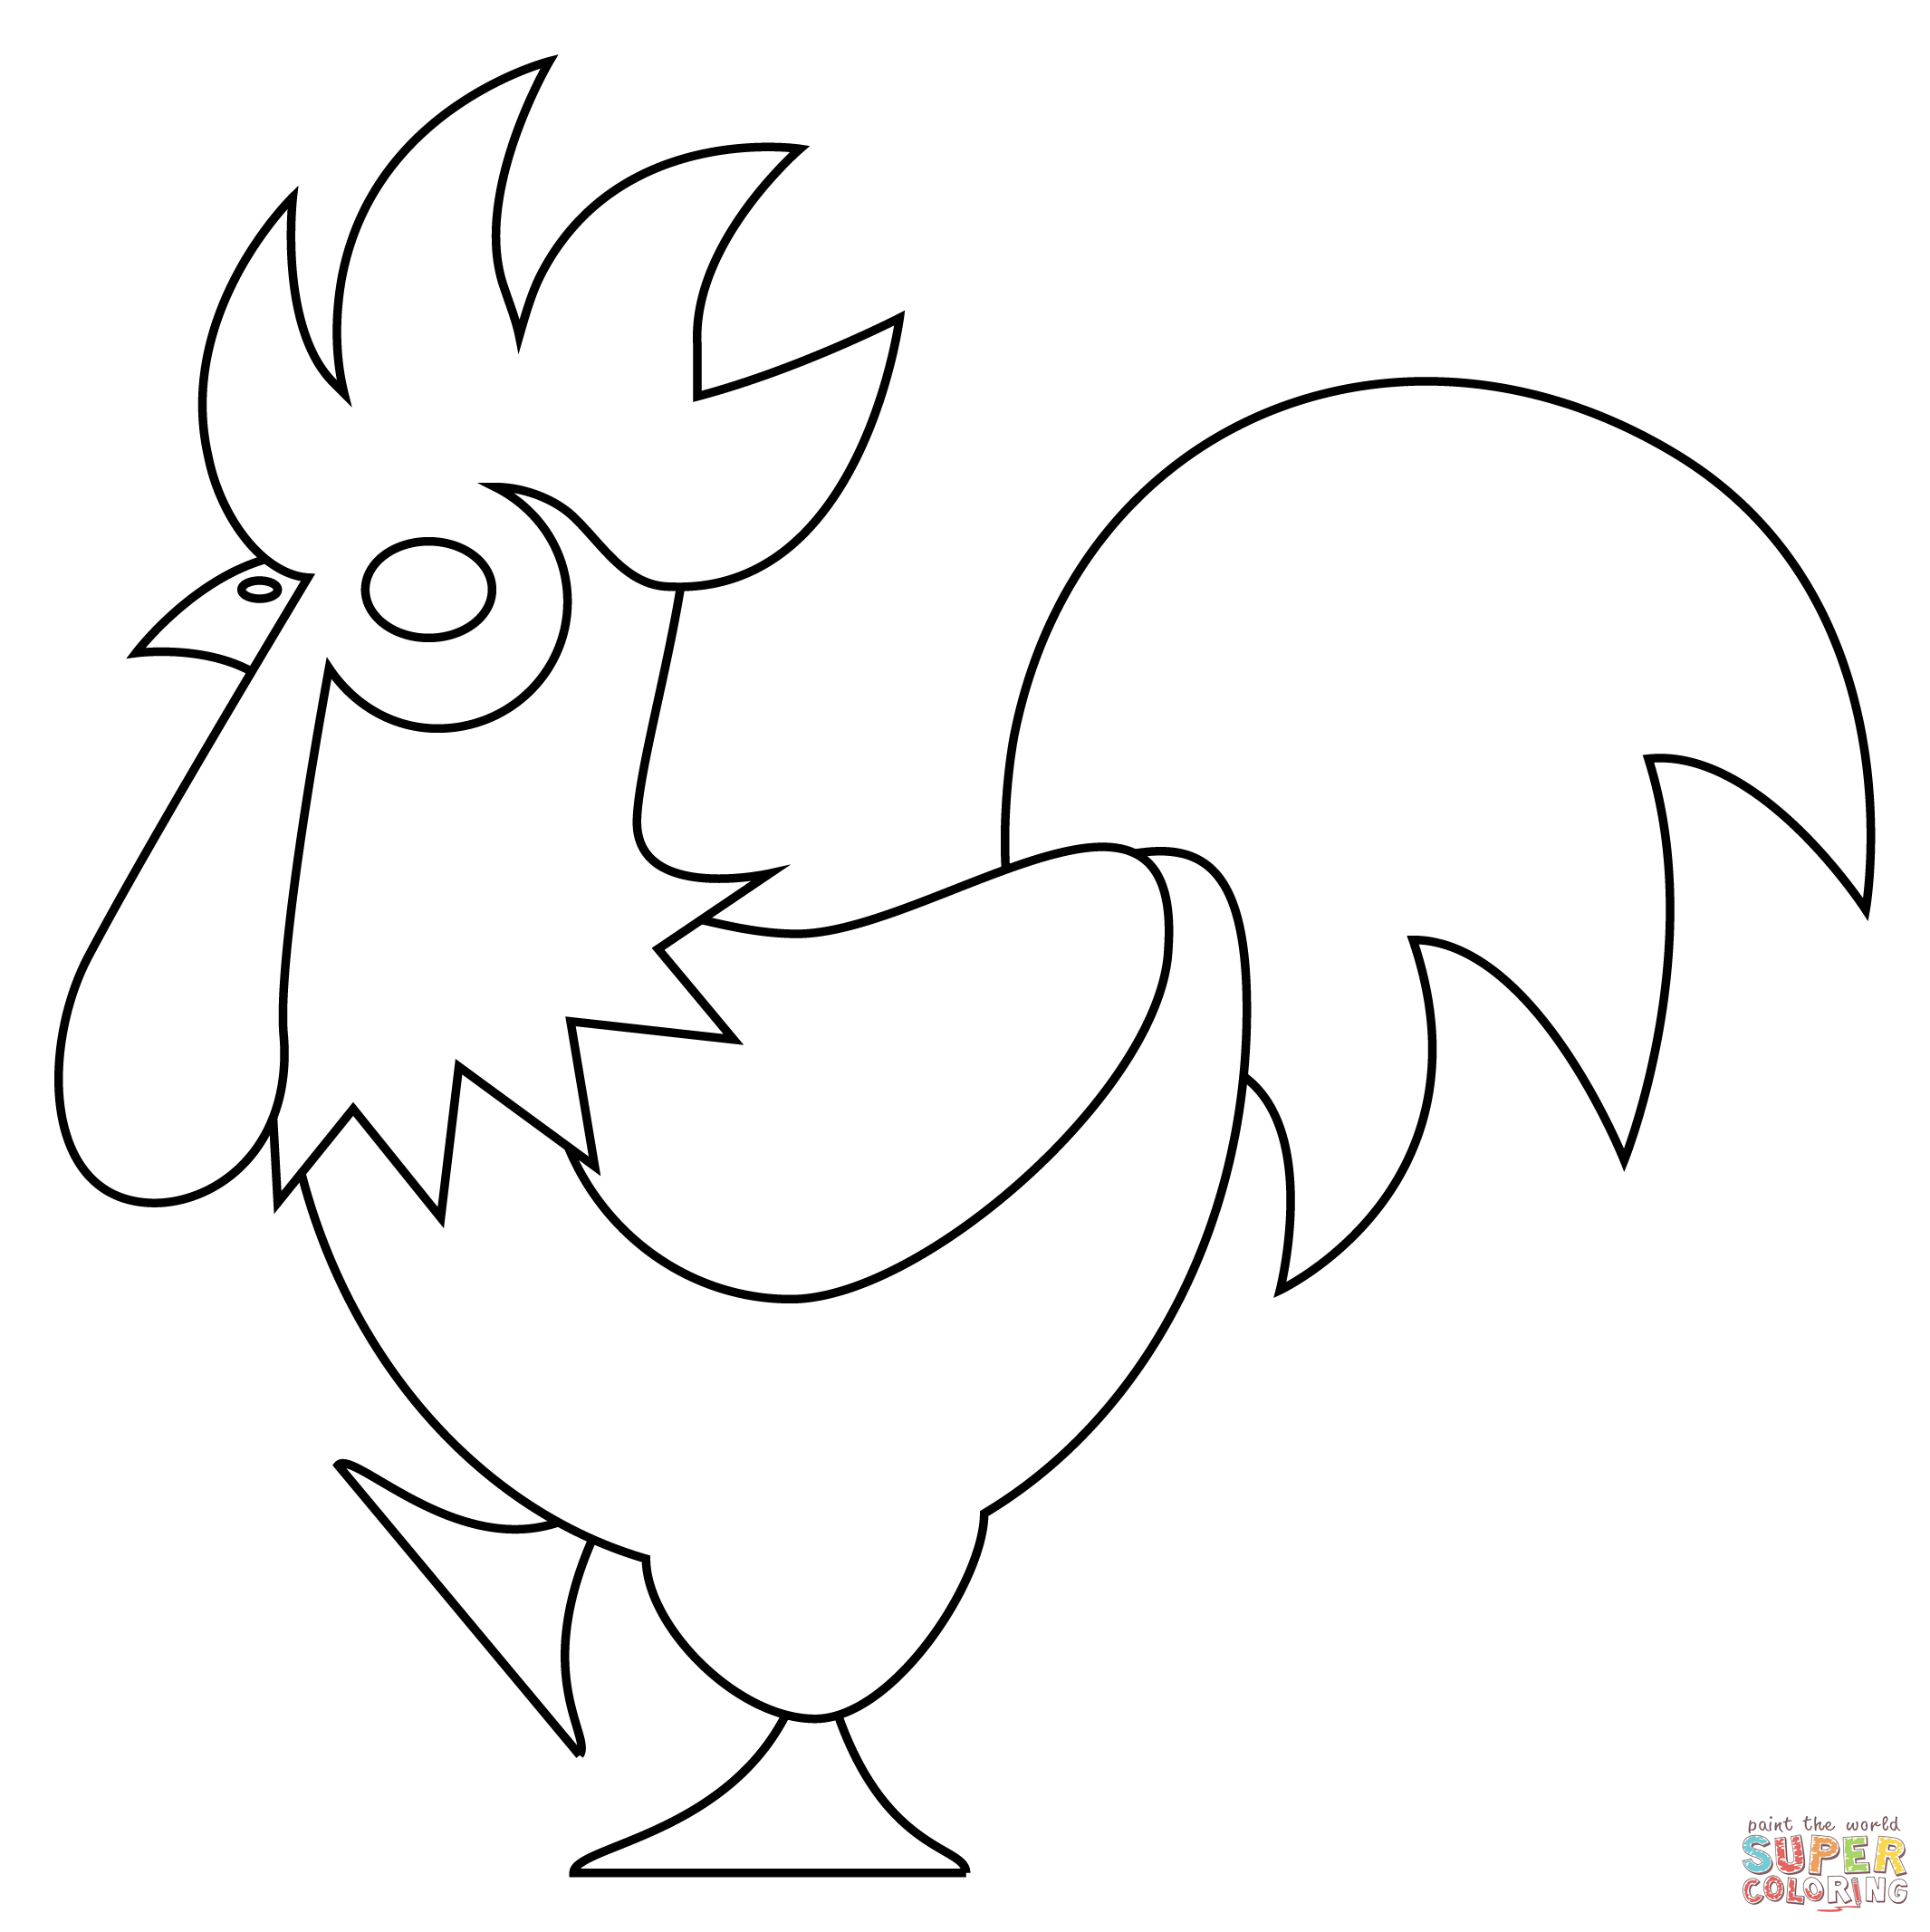 Rooster coloring page free printable coloring pages